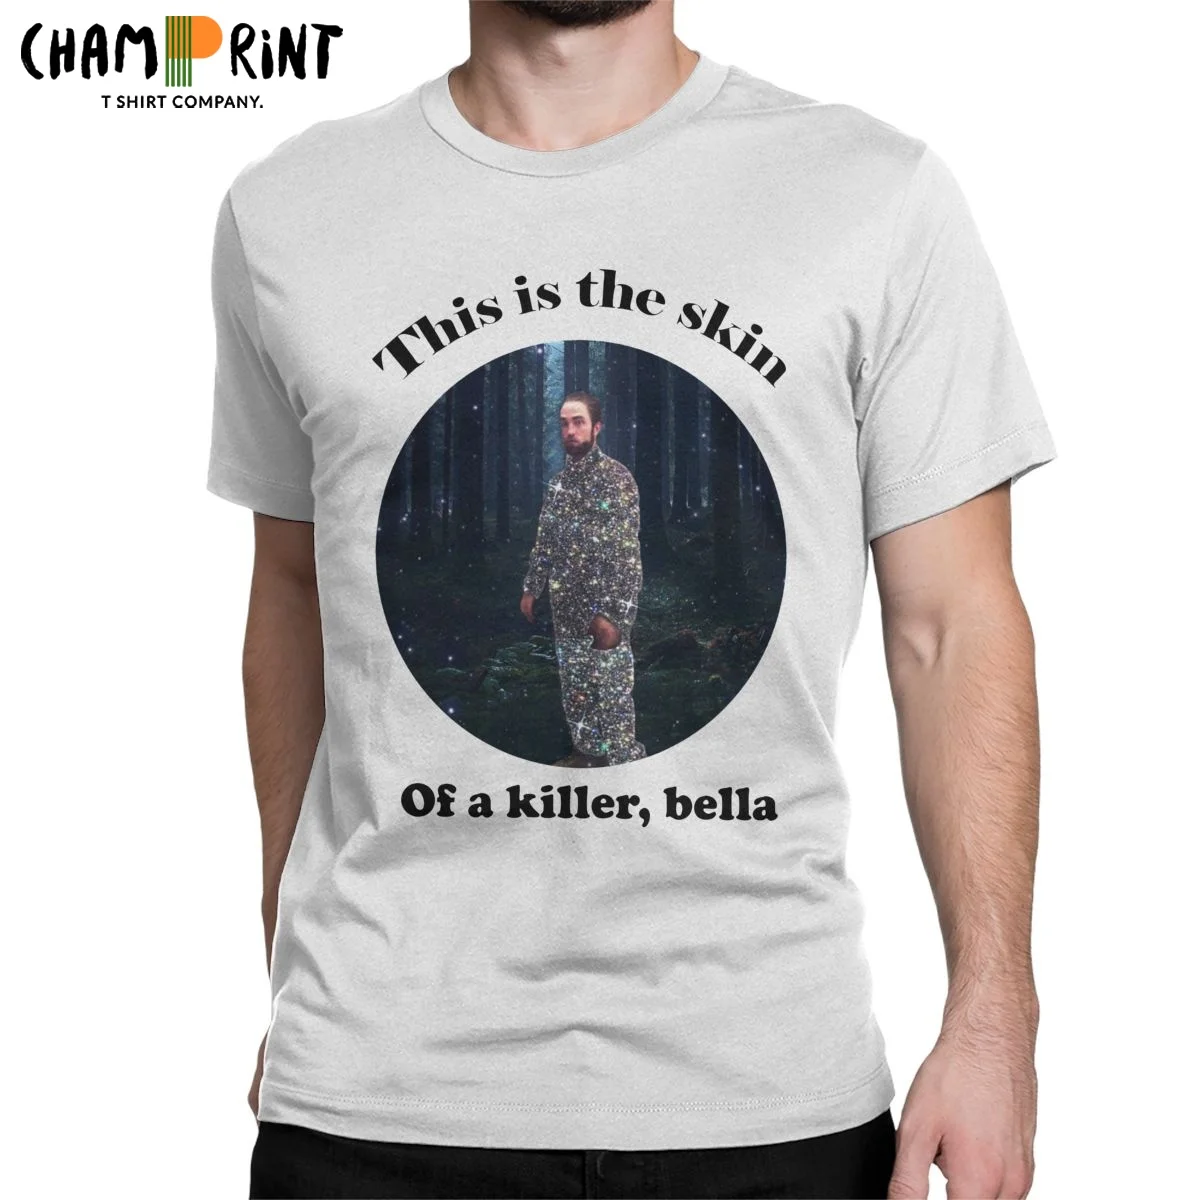 

This Is The Skin Of A Killer Bella Men's T Shirt Robert Pattinson Vintage Tees Short Sleeve Crew Neck T-Shirts Cotton Tops